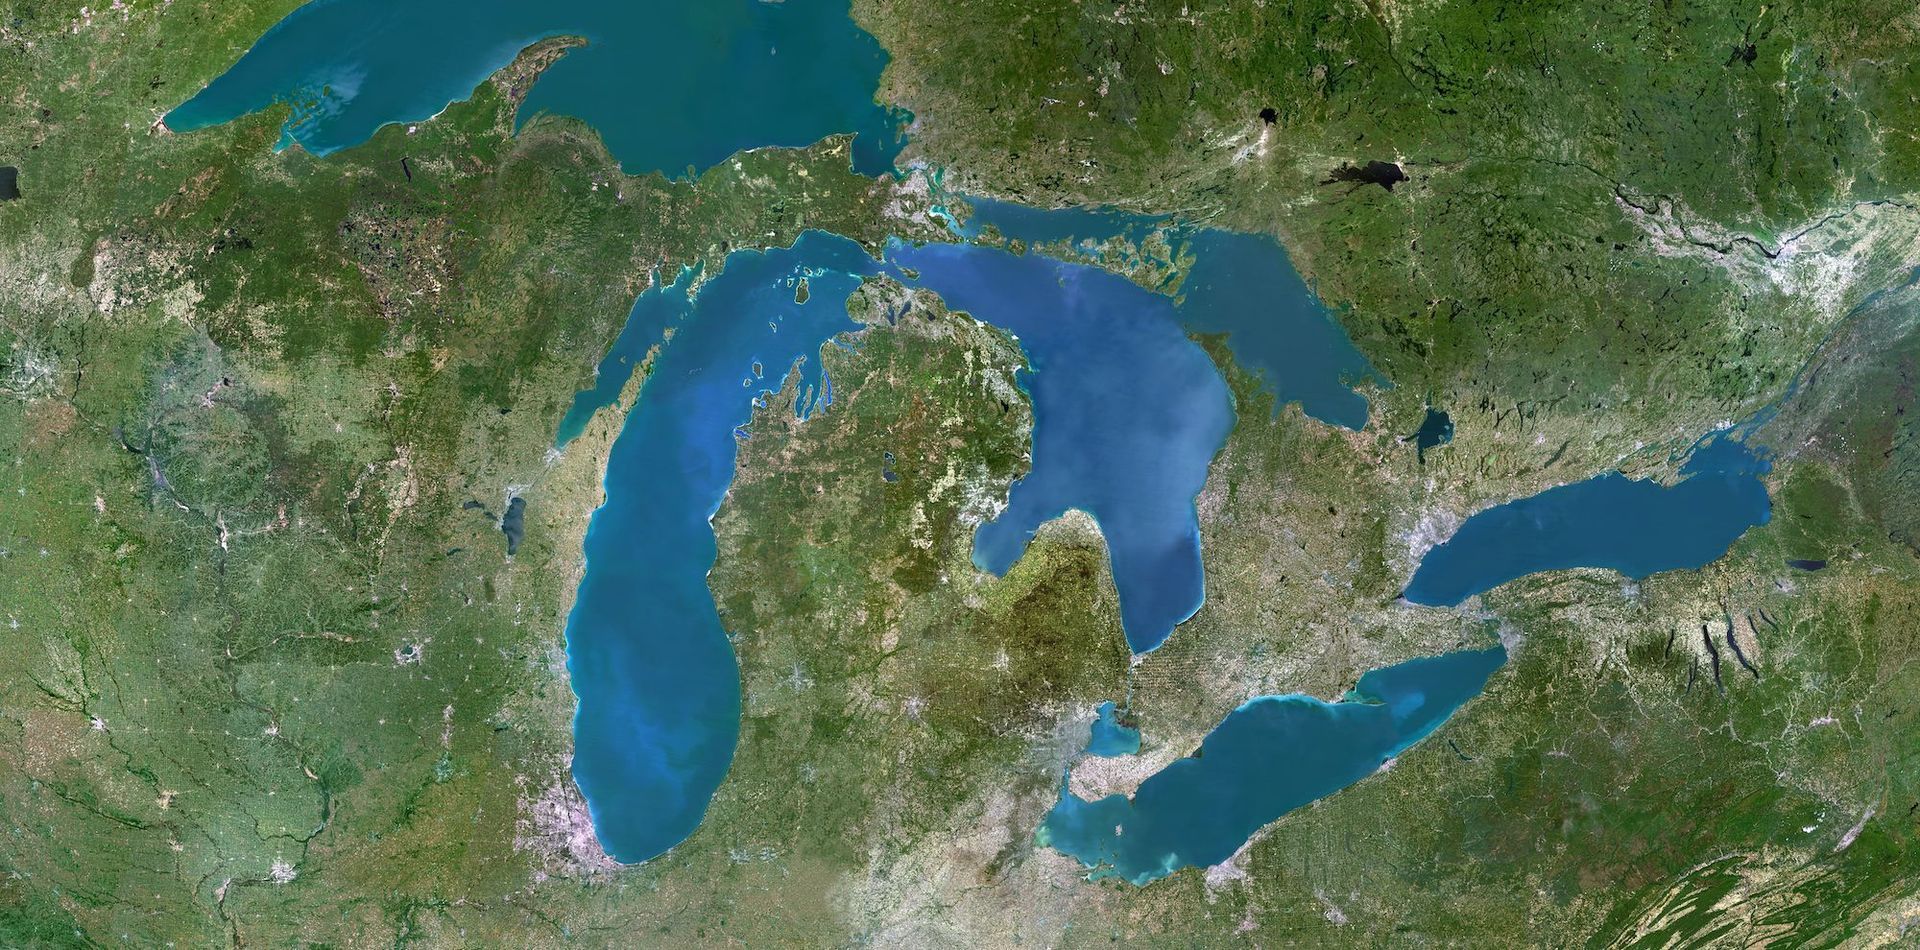 Great Lakes and Watershed Studies